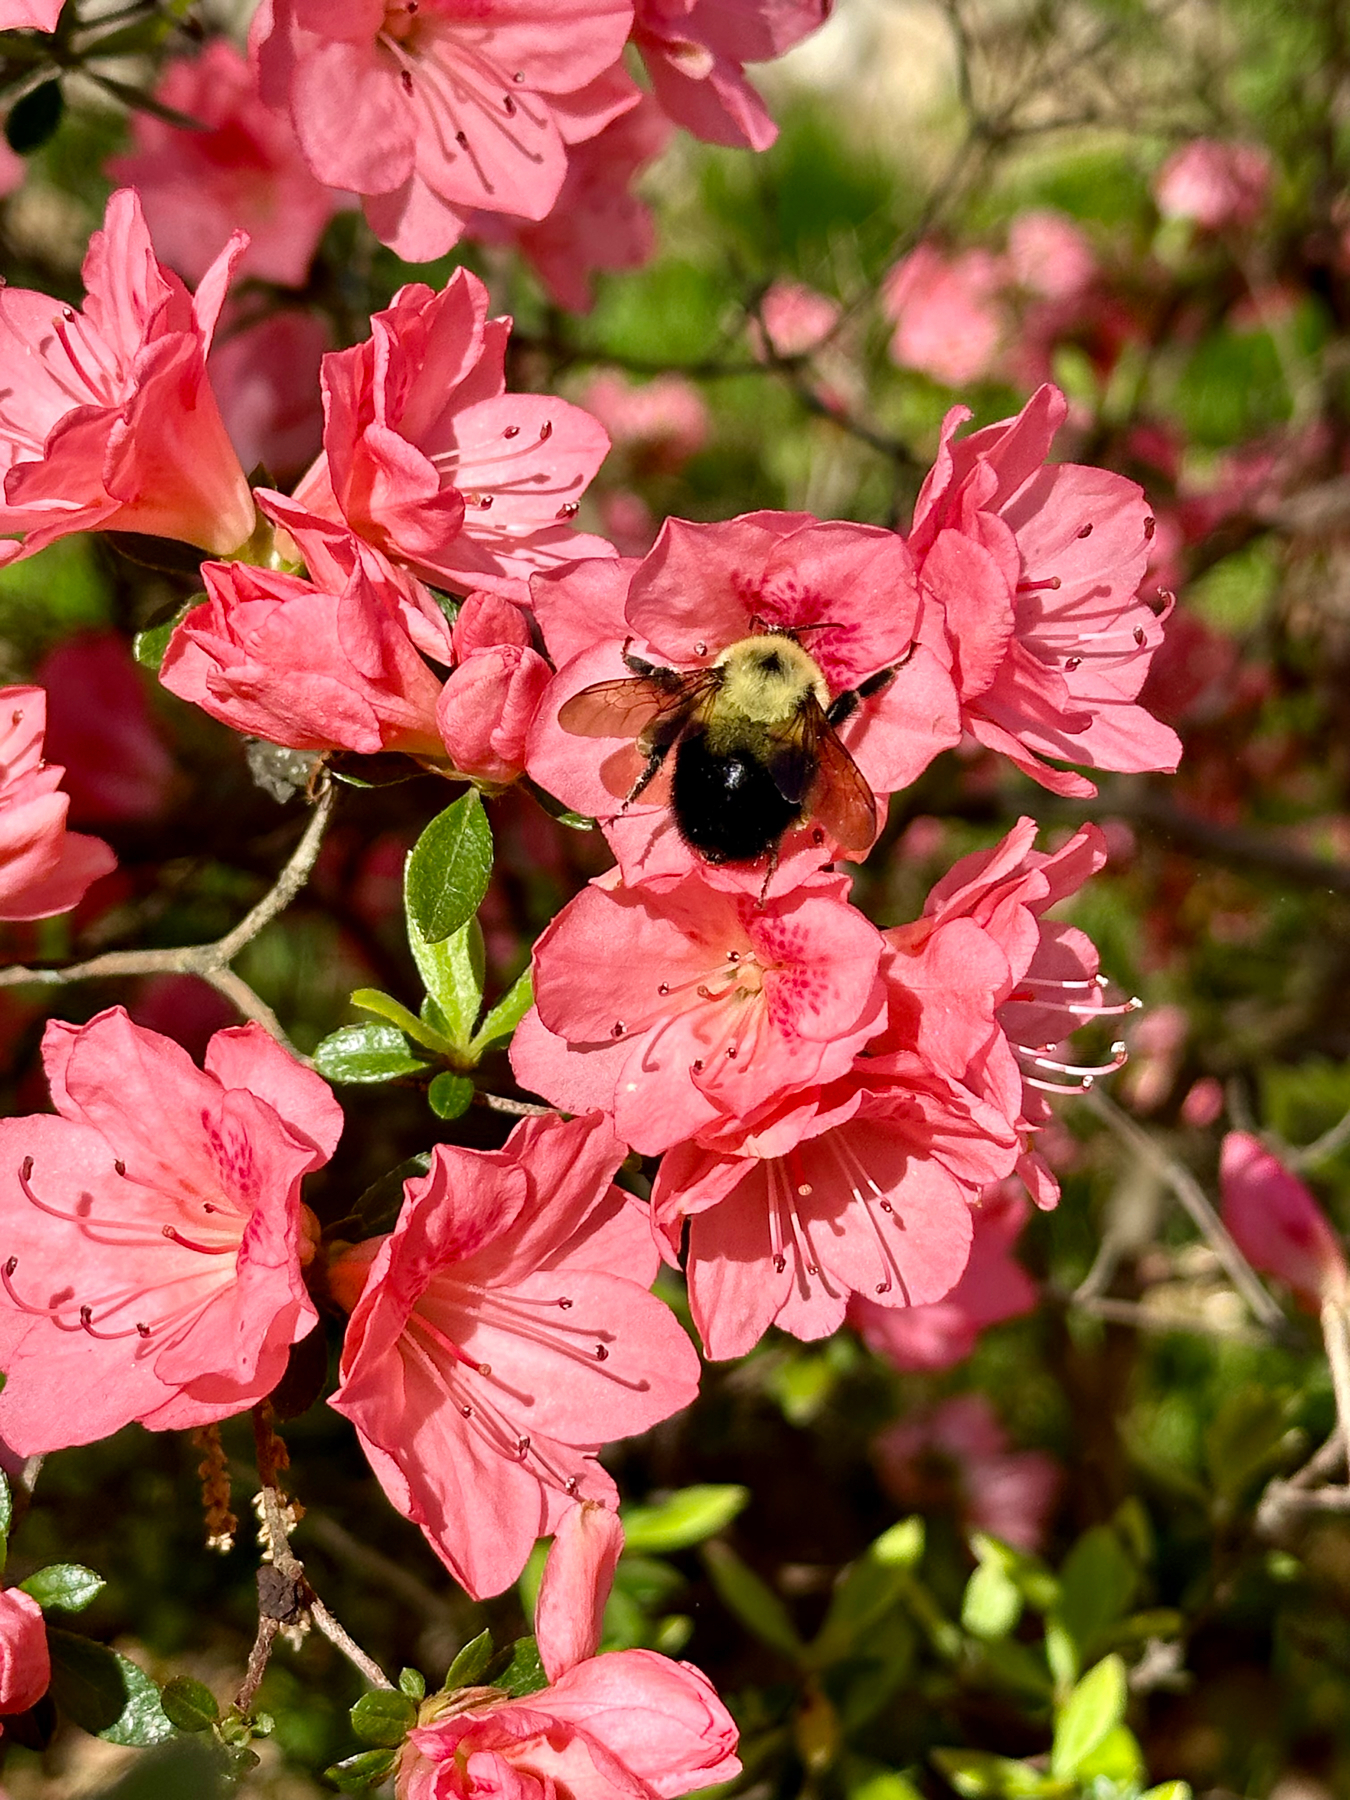 A bumblebee on pink azalea flowers with green foliage in the background.